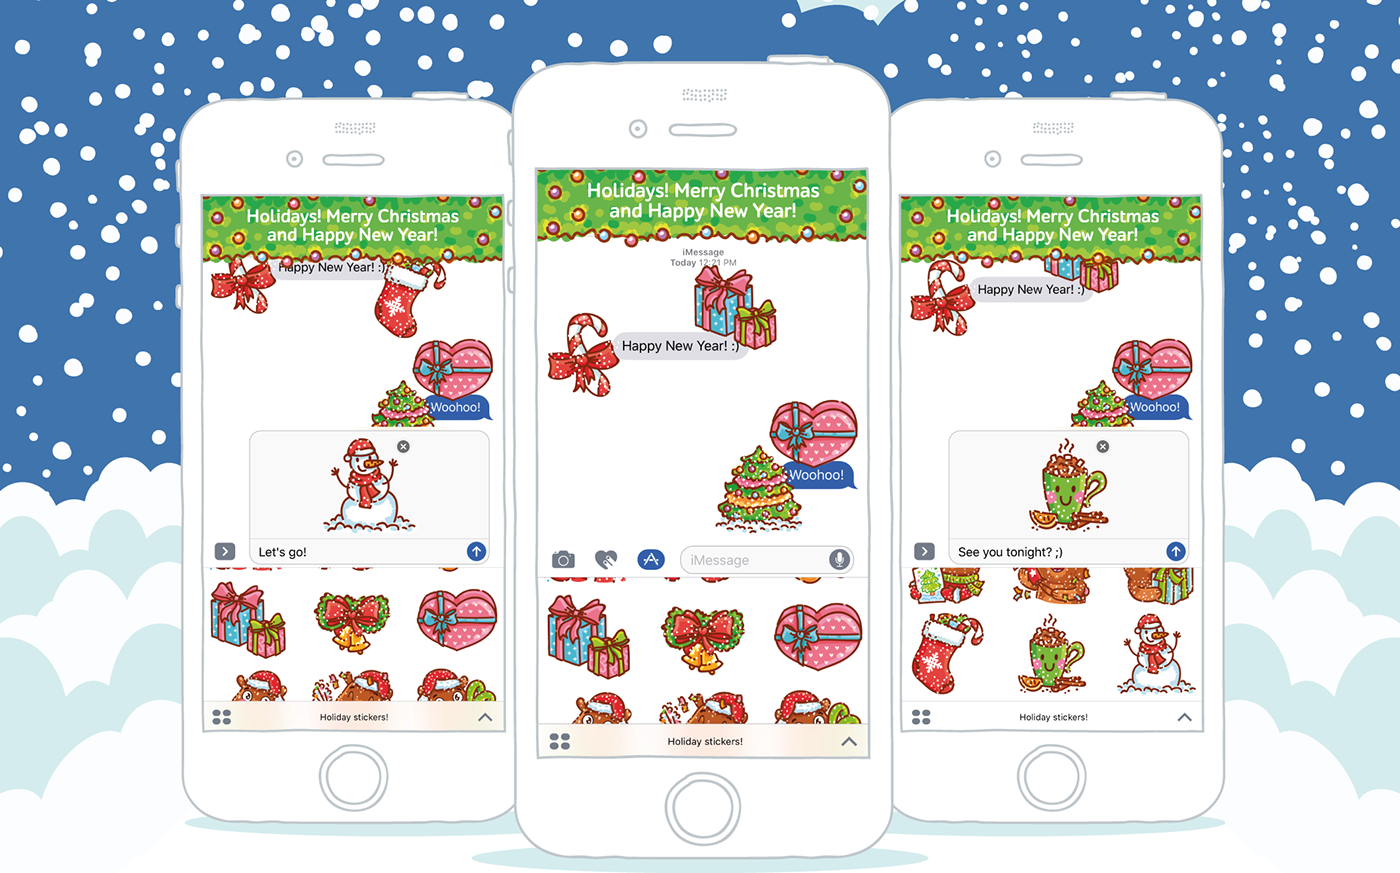 stickers holidays new year Christmas Merry Christmas imessage Cat bear cute snow